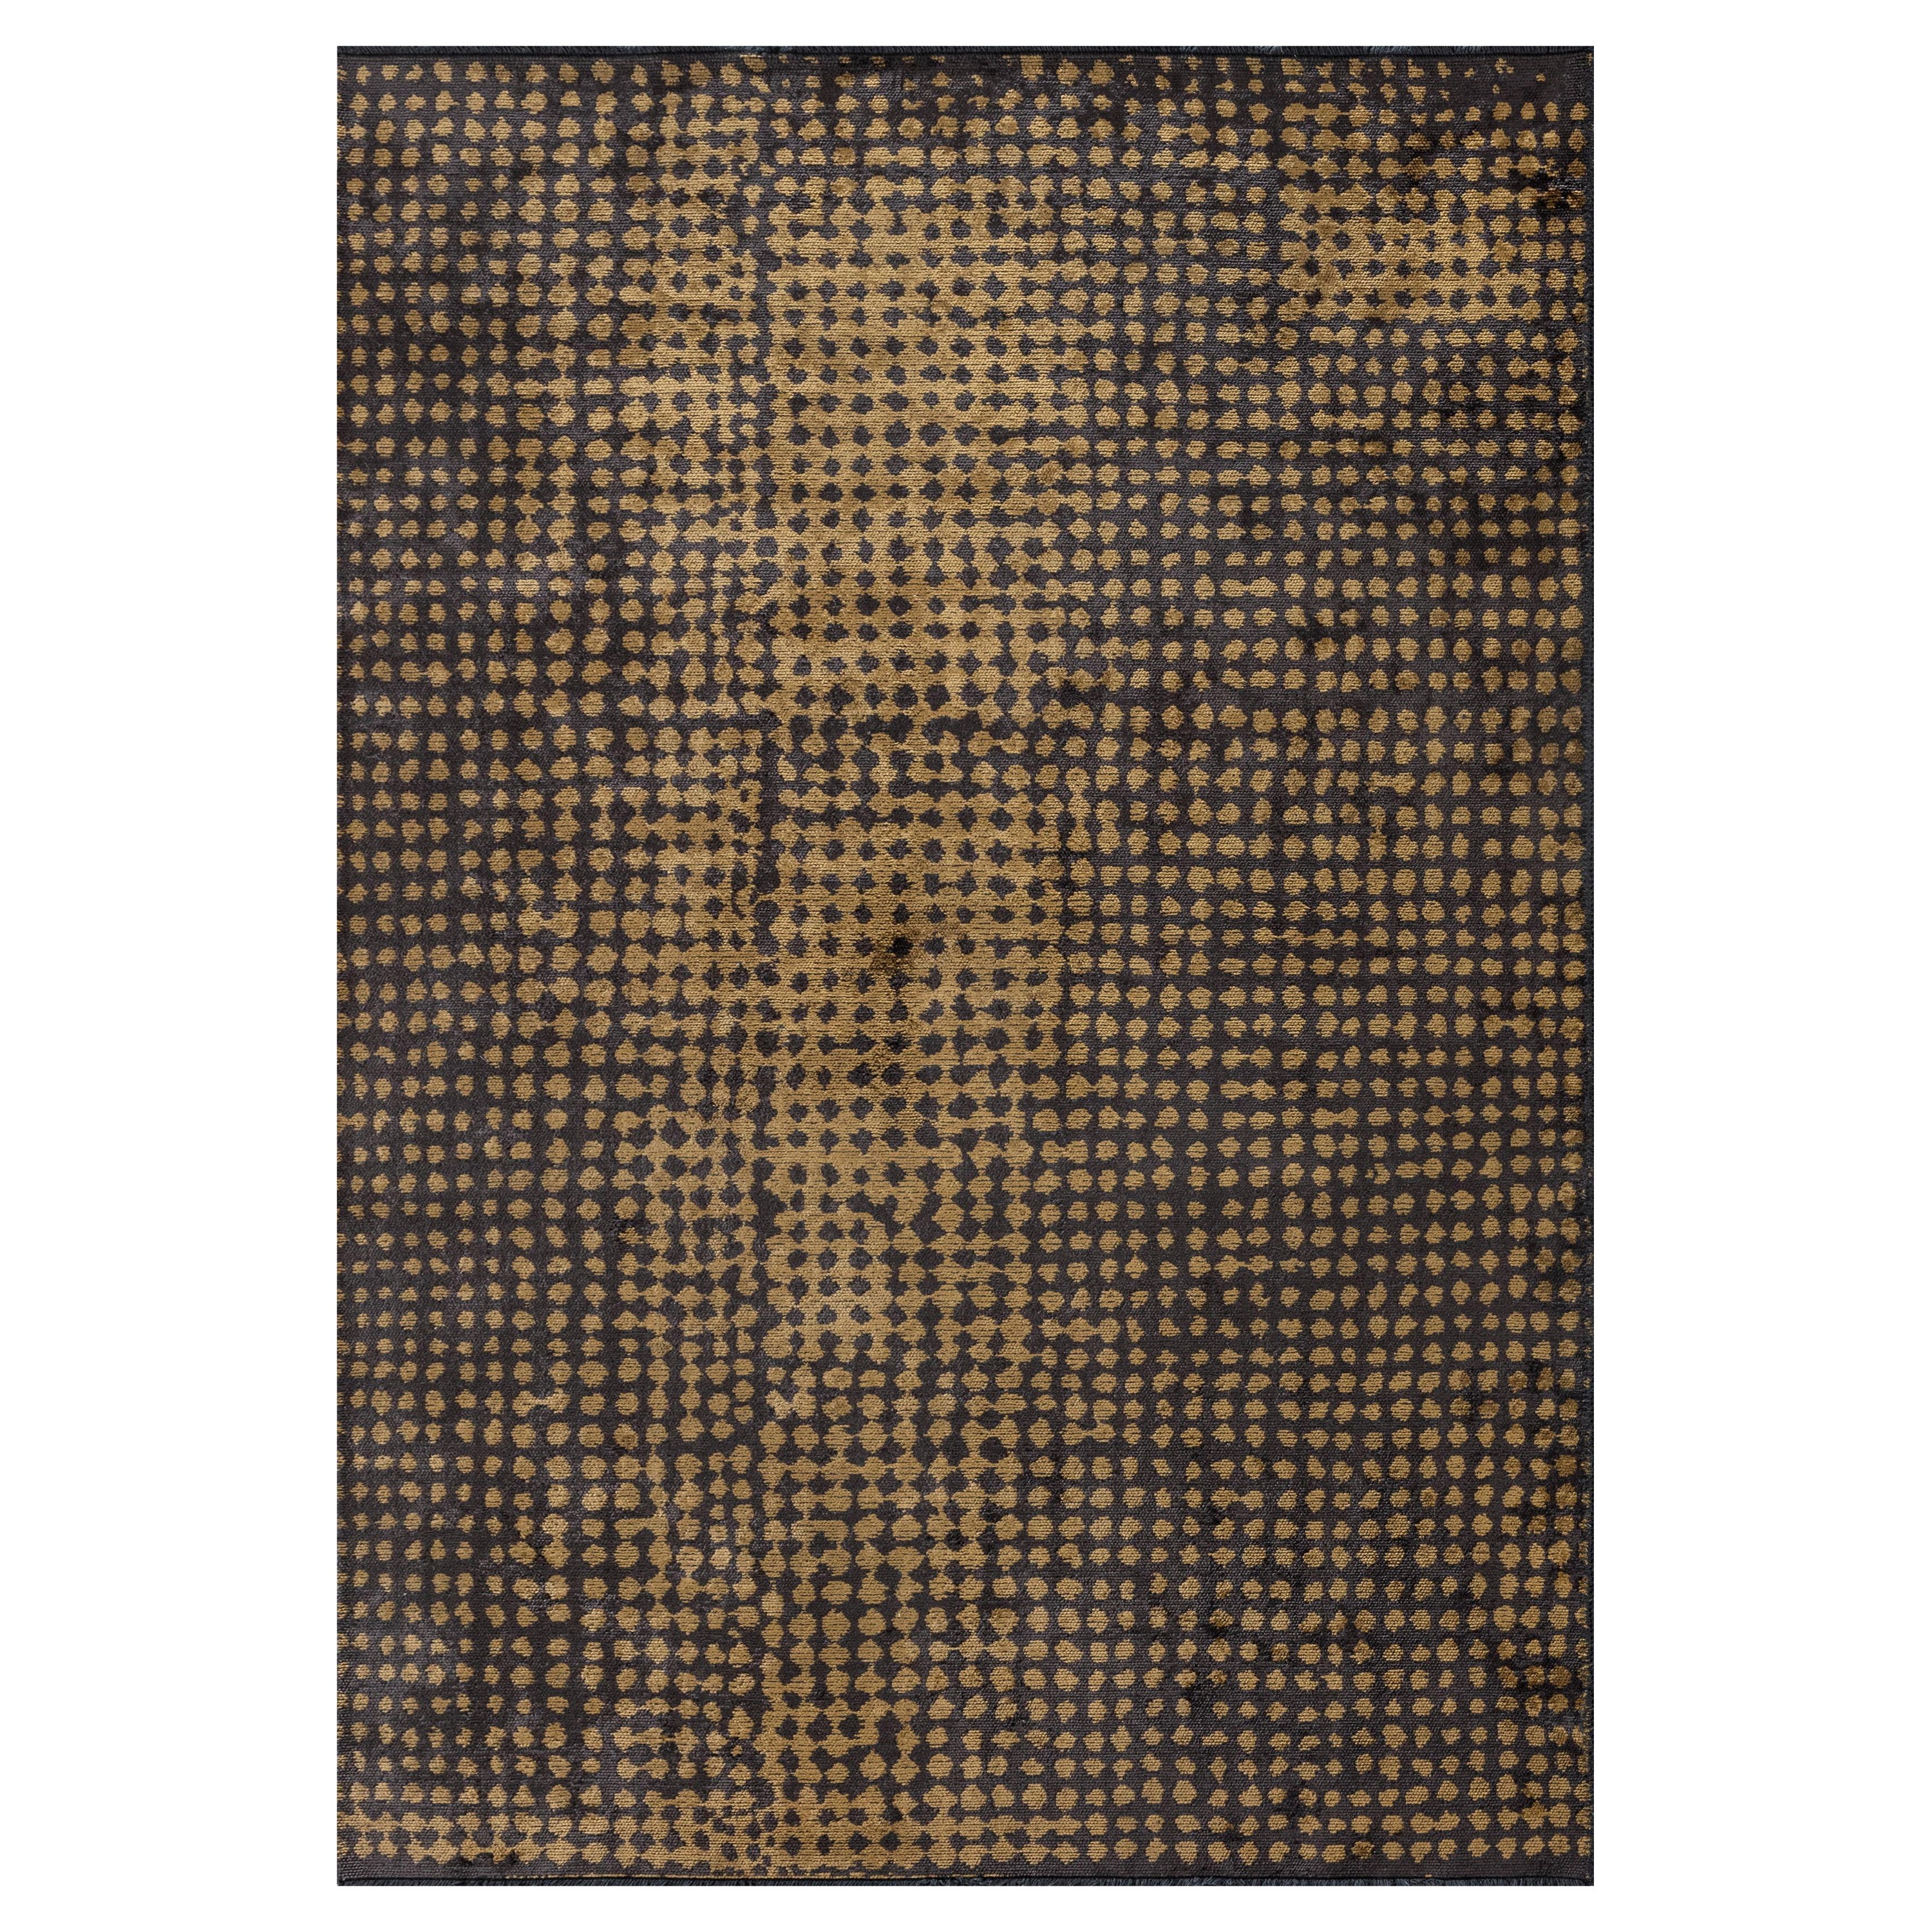 For Sale:  (Yellow) Modern Polka Dots Luxury Hand-Finished Area Rug